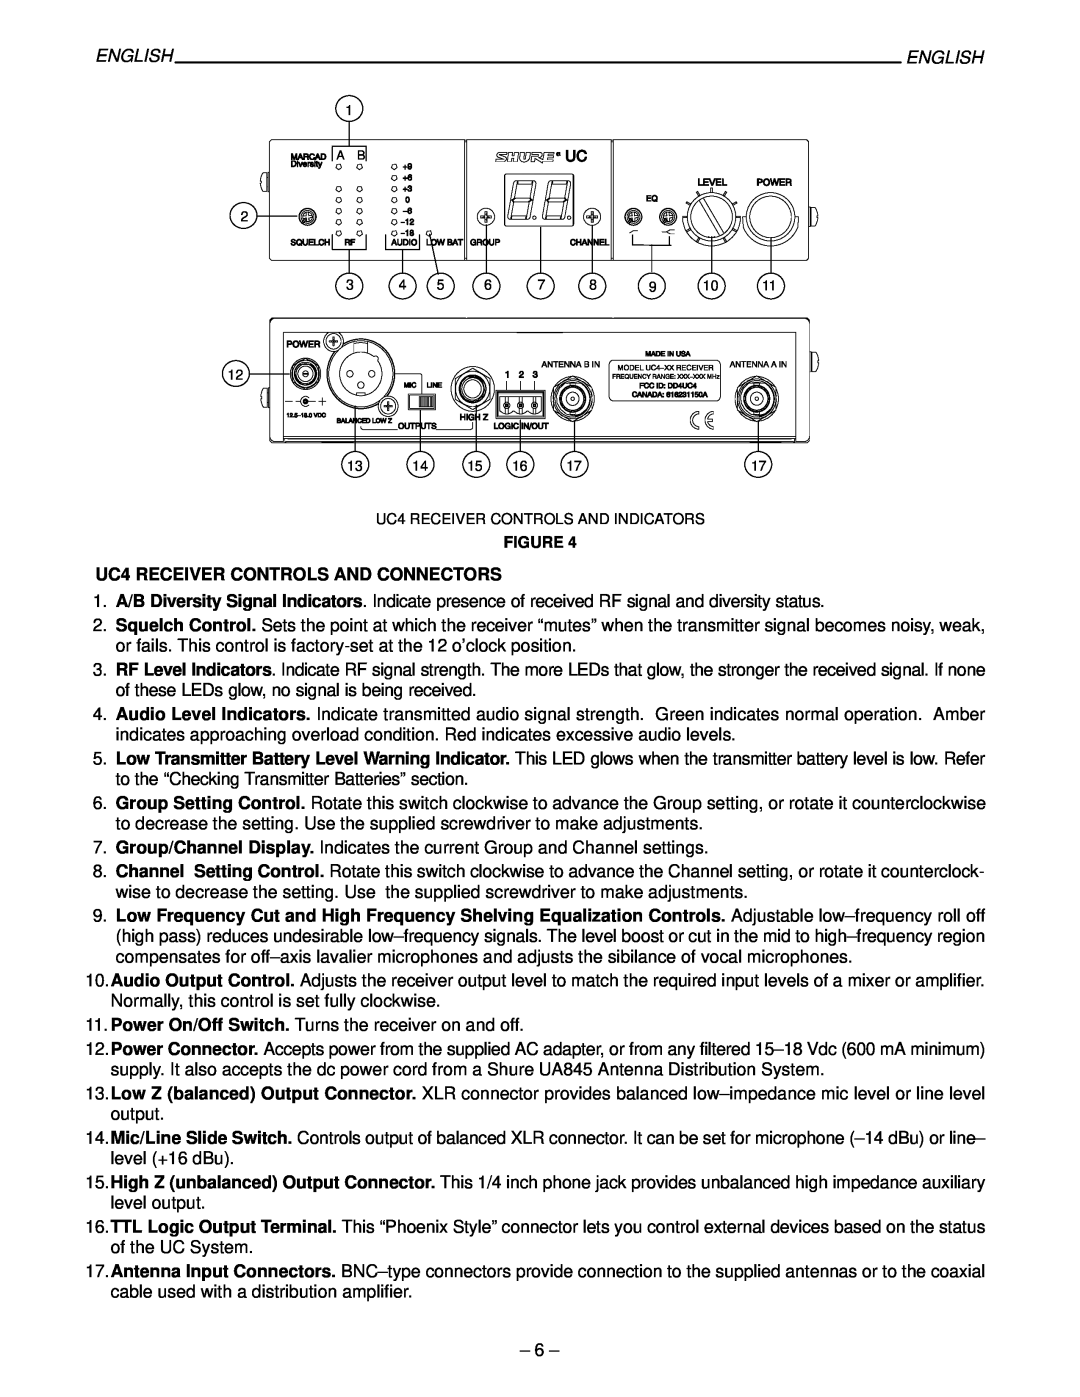 Shure 27B8614, UC Wireless System manual UC4 RECEIVER CONTROLS AND CONNECTORS, English 